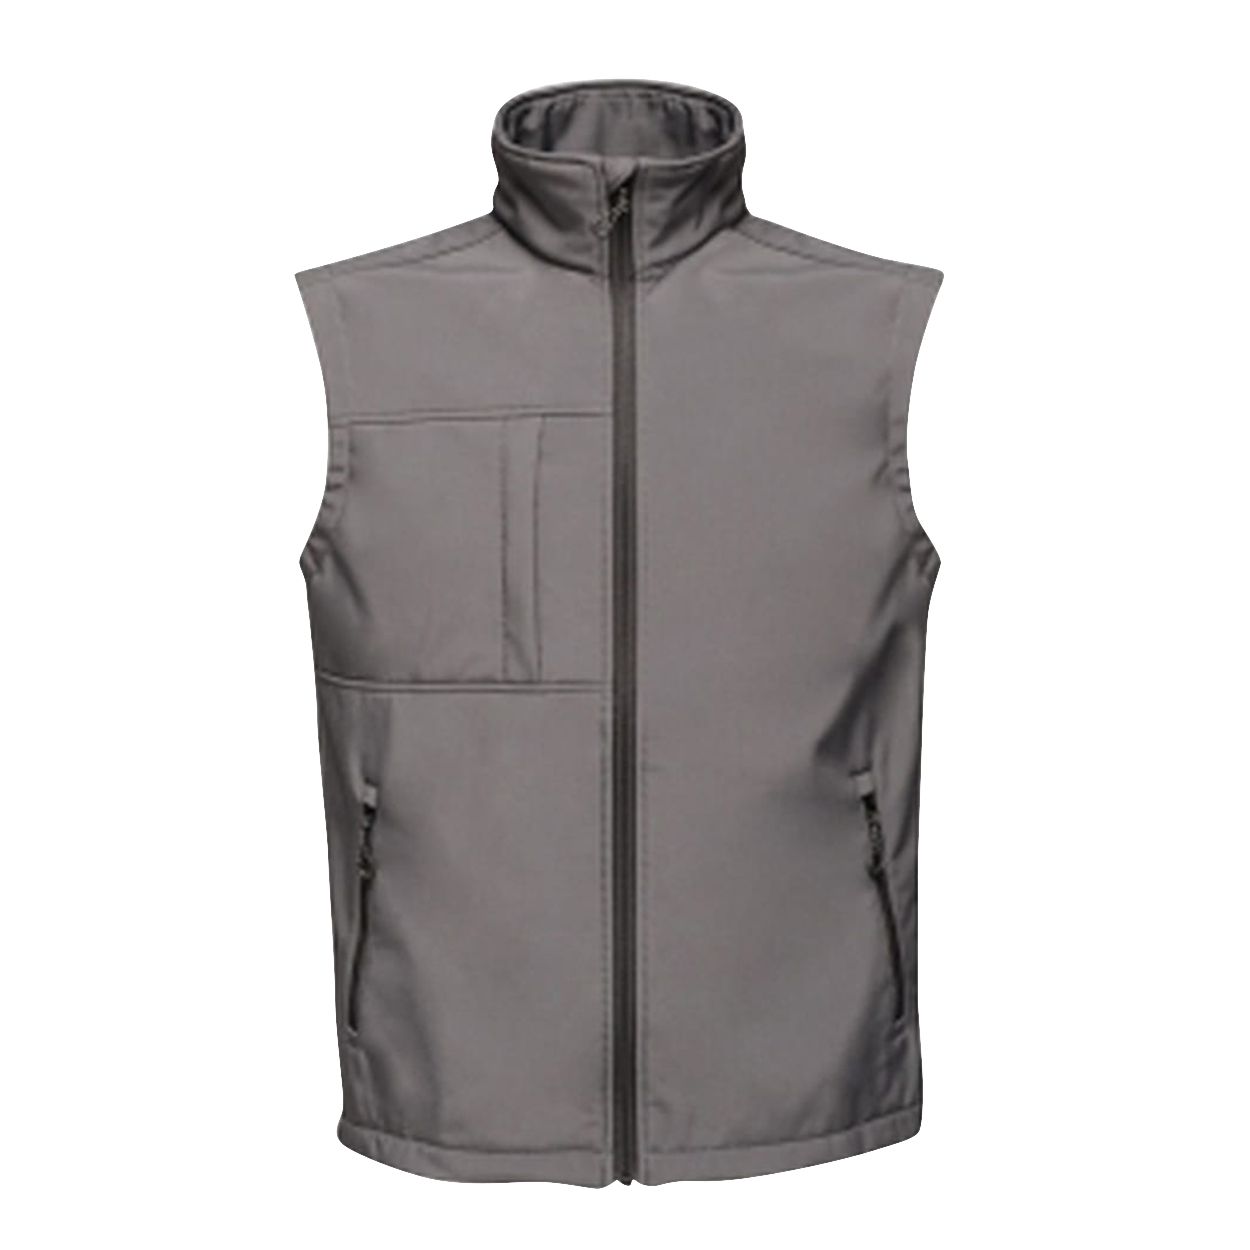 100% Polyester. Warm backed woven softshell bodywarmer. Waterproof and breathable wind resistant membrane fabric. 2 zipped lower pockets and 1 zipped chest pocket. Adjustable shockcord.